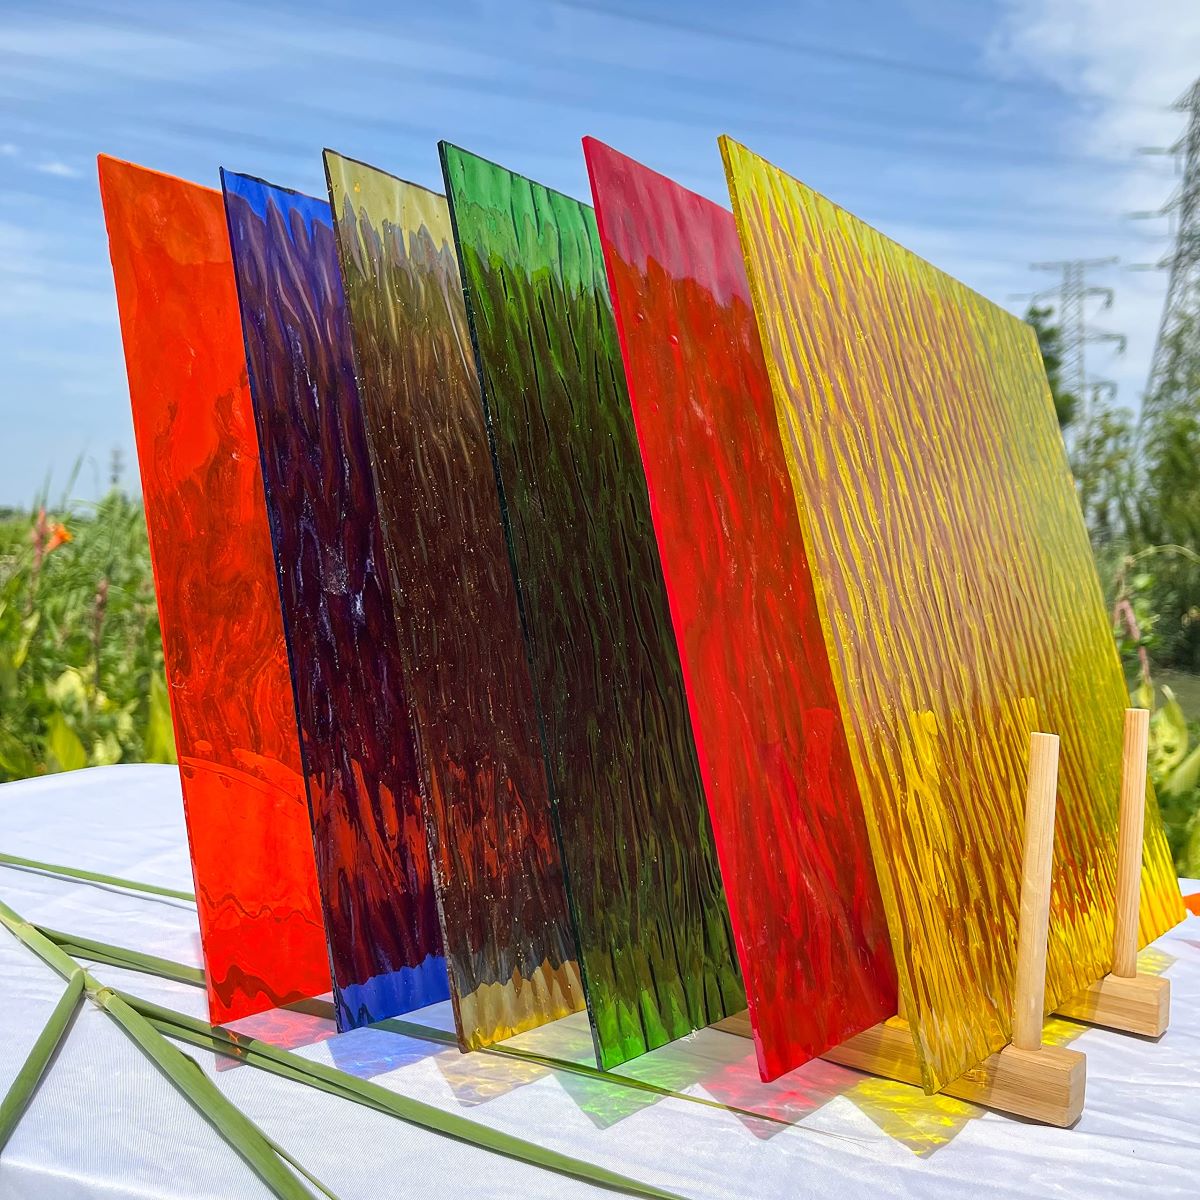 How To Store Stained Glass Sheets